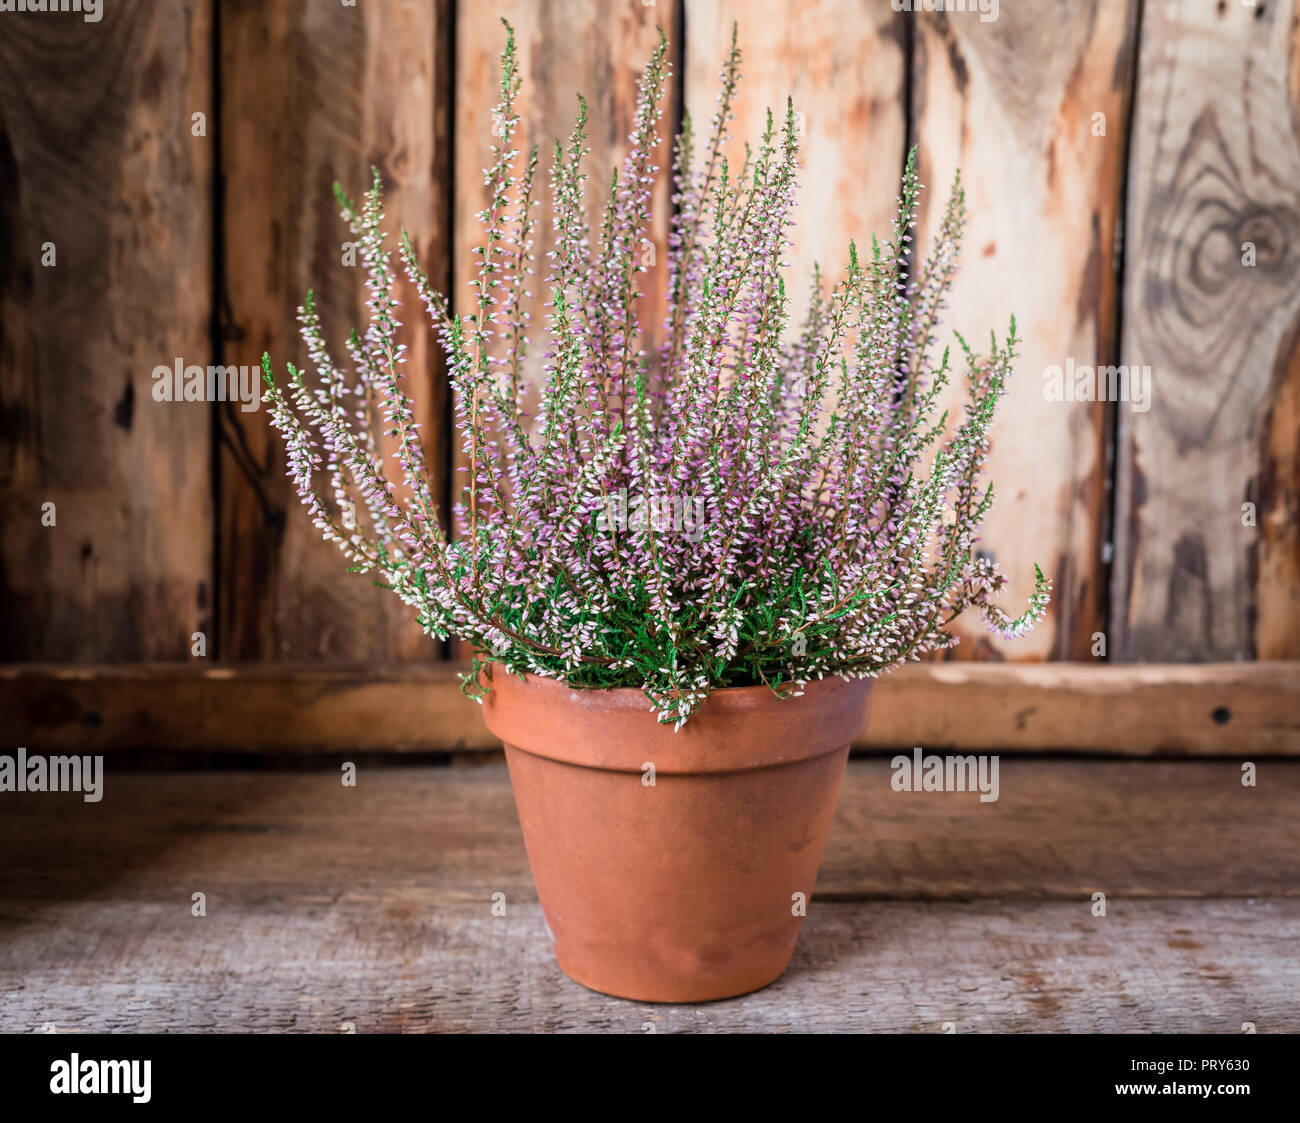 Cultivated potted pink calluna vulgaris or common heather flowers standing on wooden background, toned Stock Photo